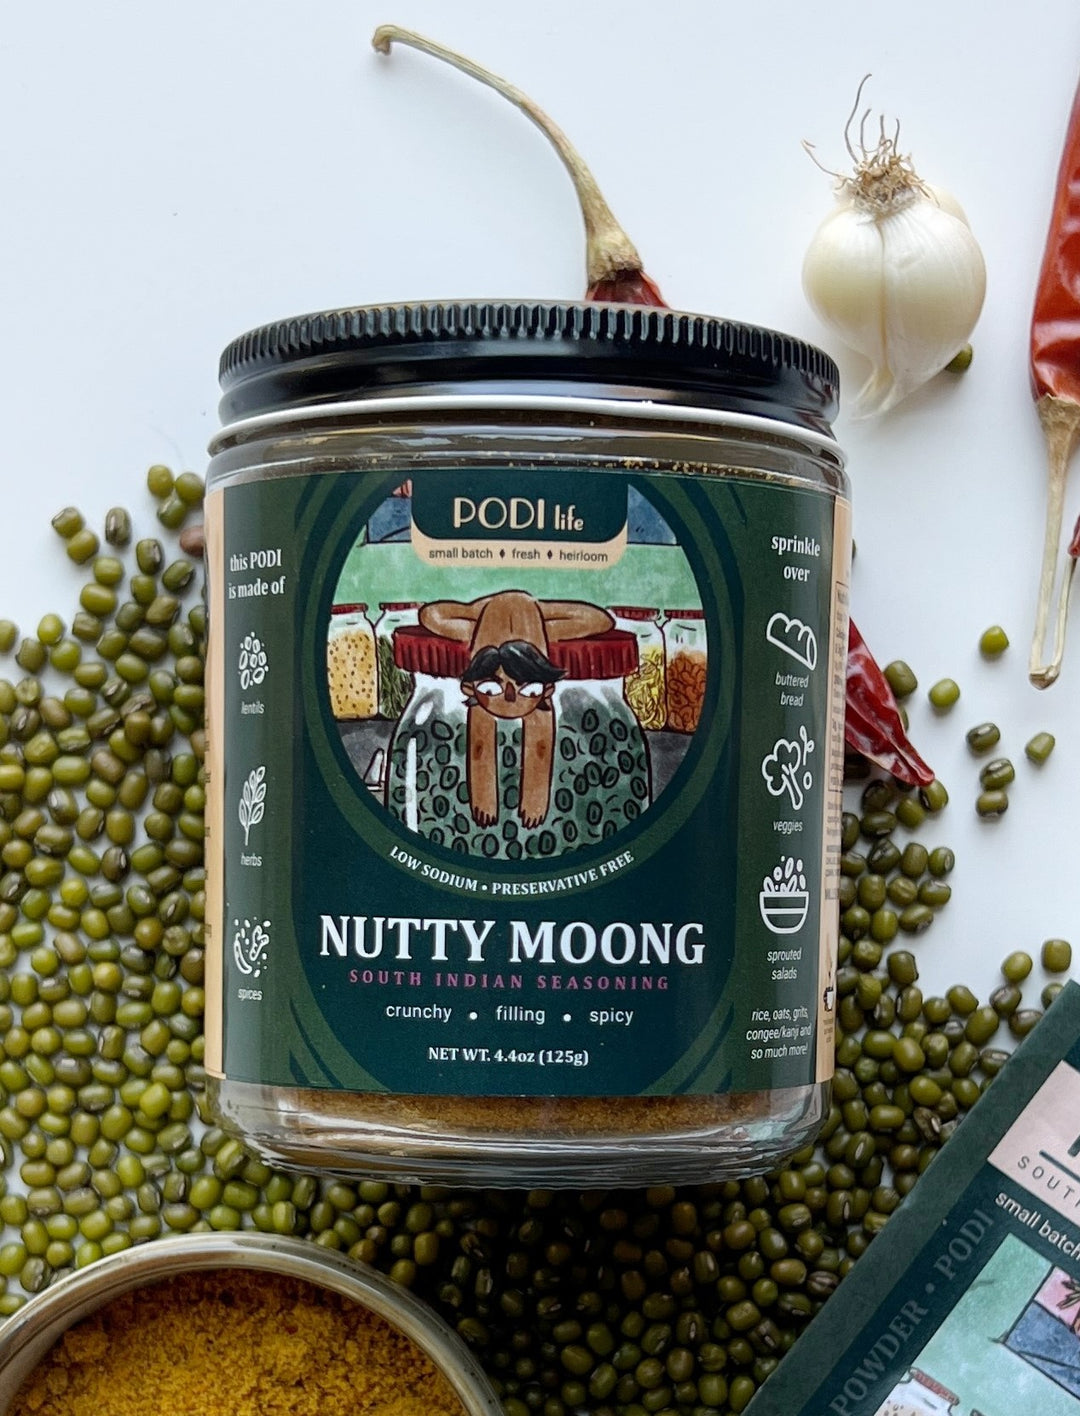 Nutty Moong